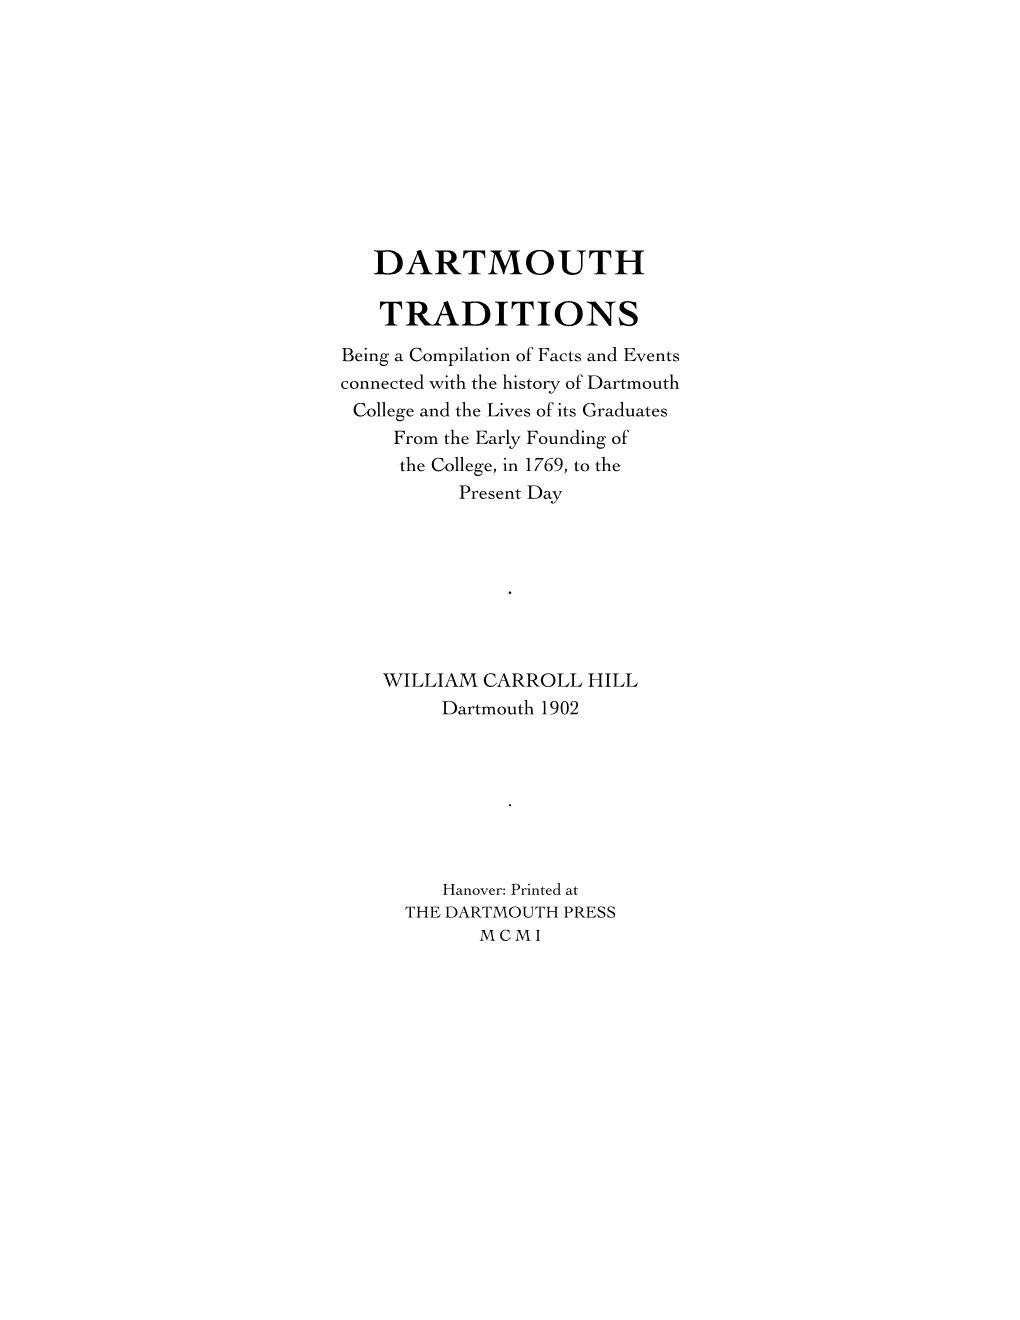 Dartmouth Traditions